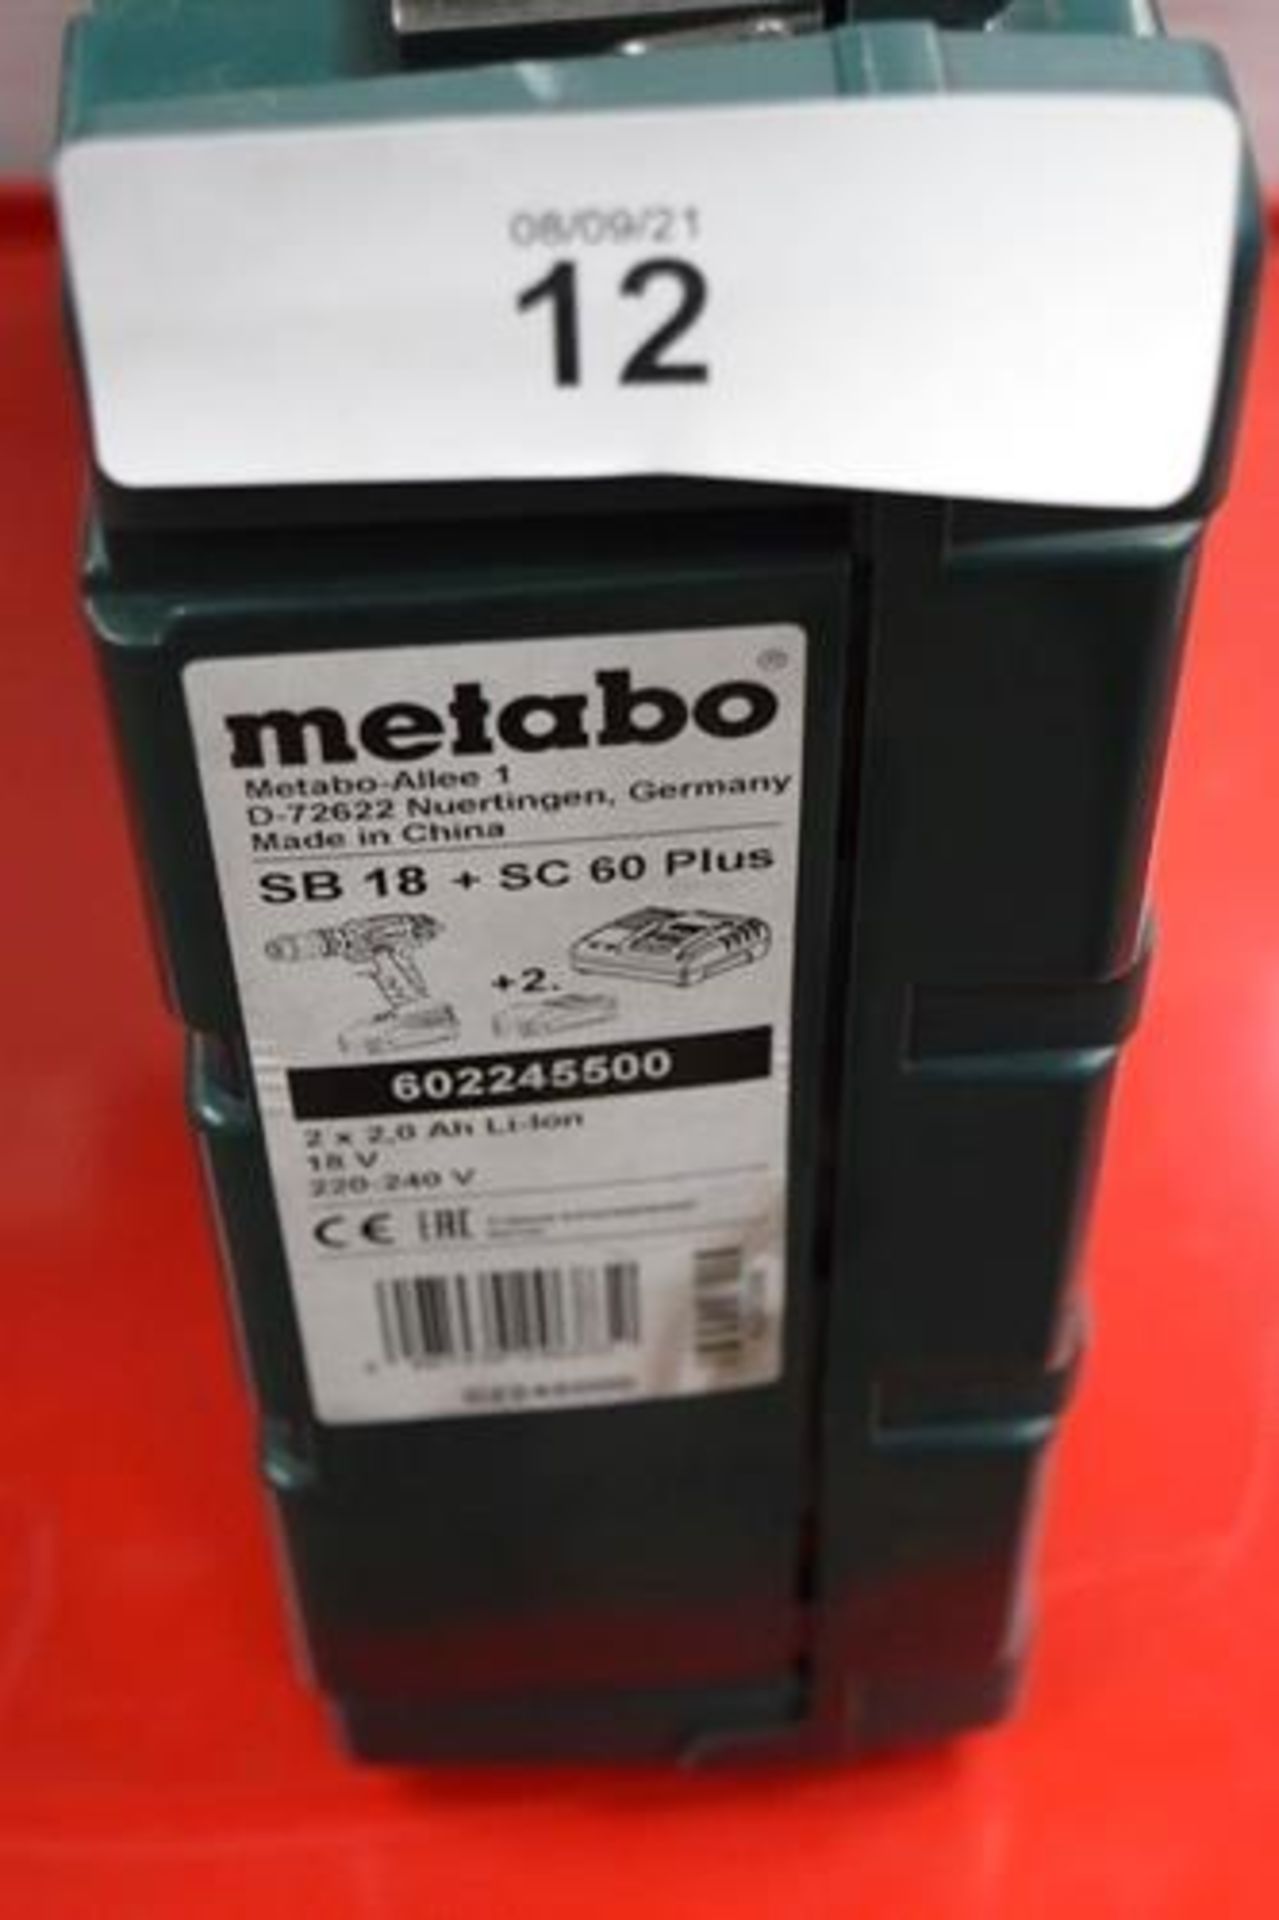 1 x Metabo 18V cordless drill, model SB18 + SC60 Plus, with 1 x 18V 2.0Ah battery, charger, manual - Image 4 of 4